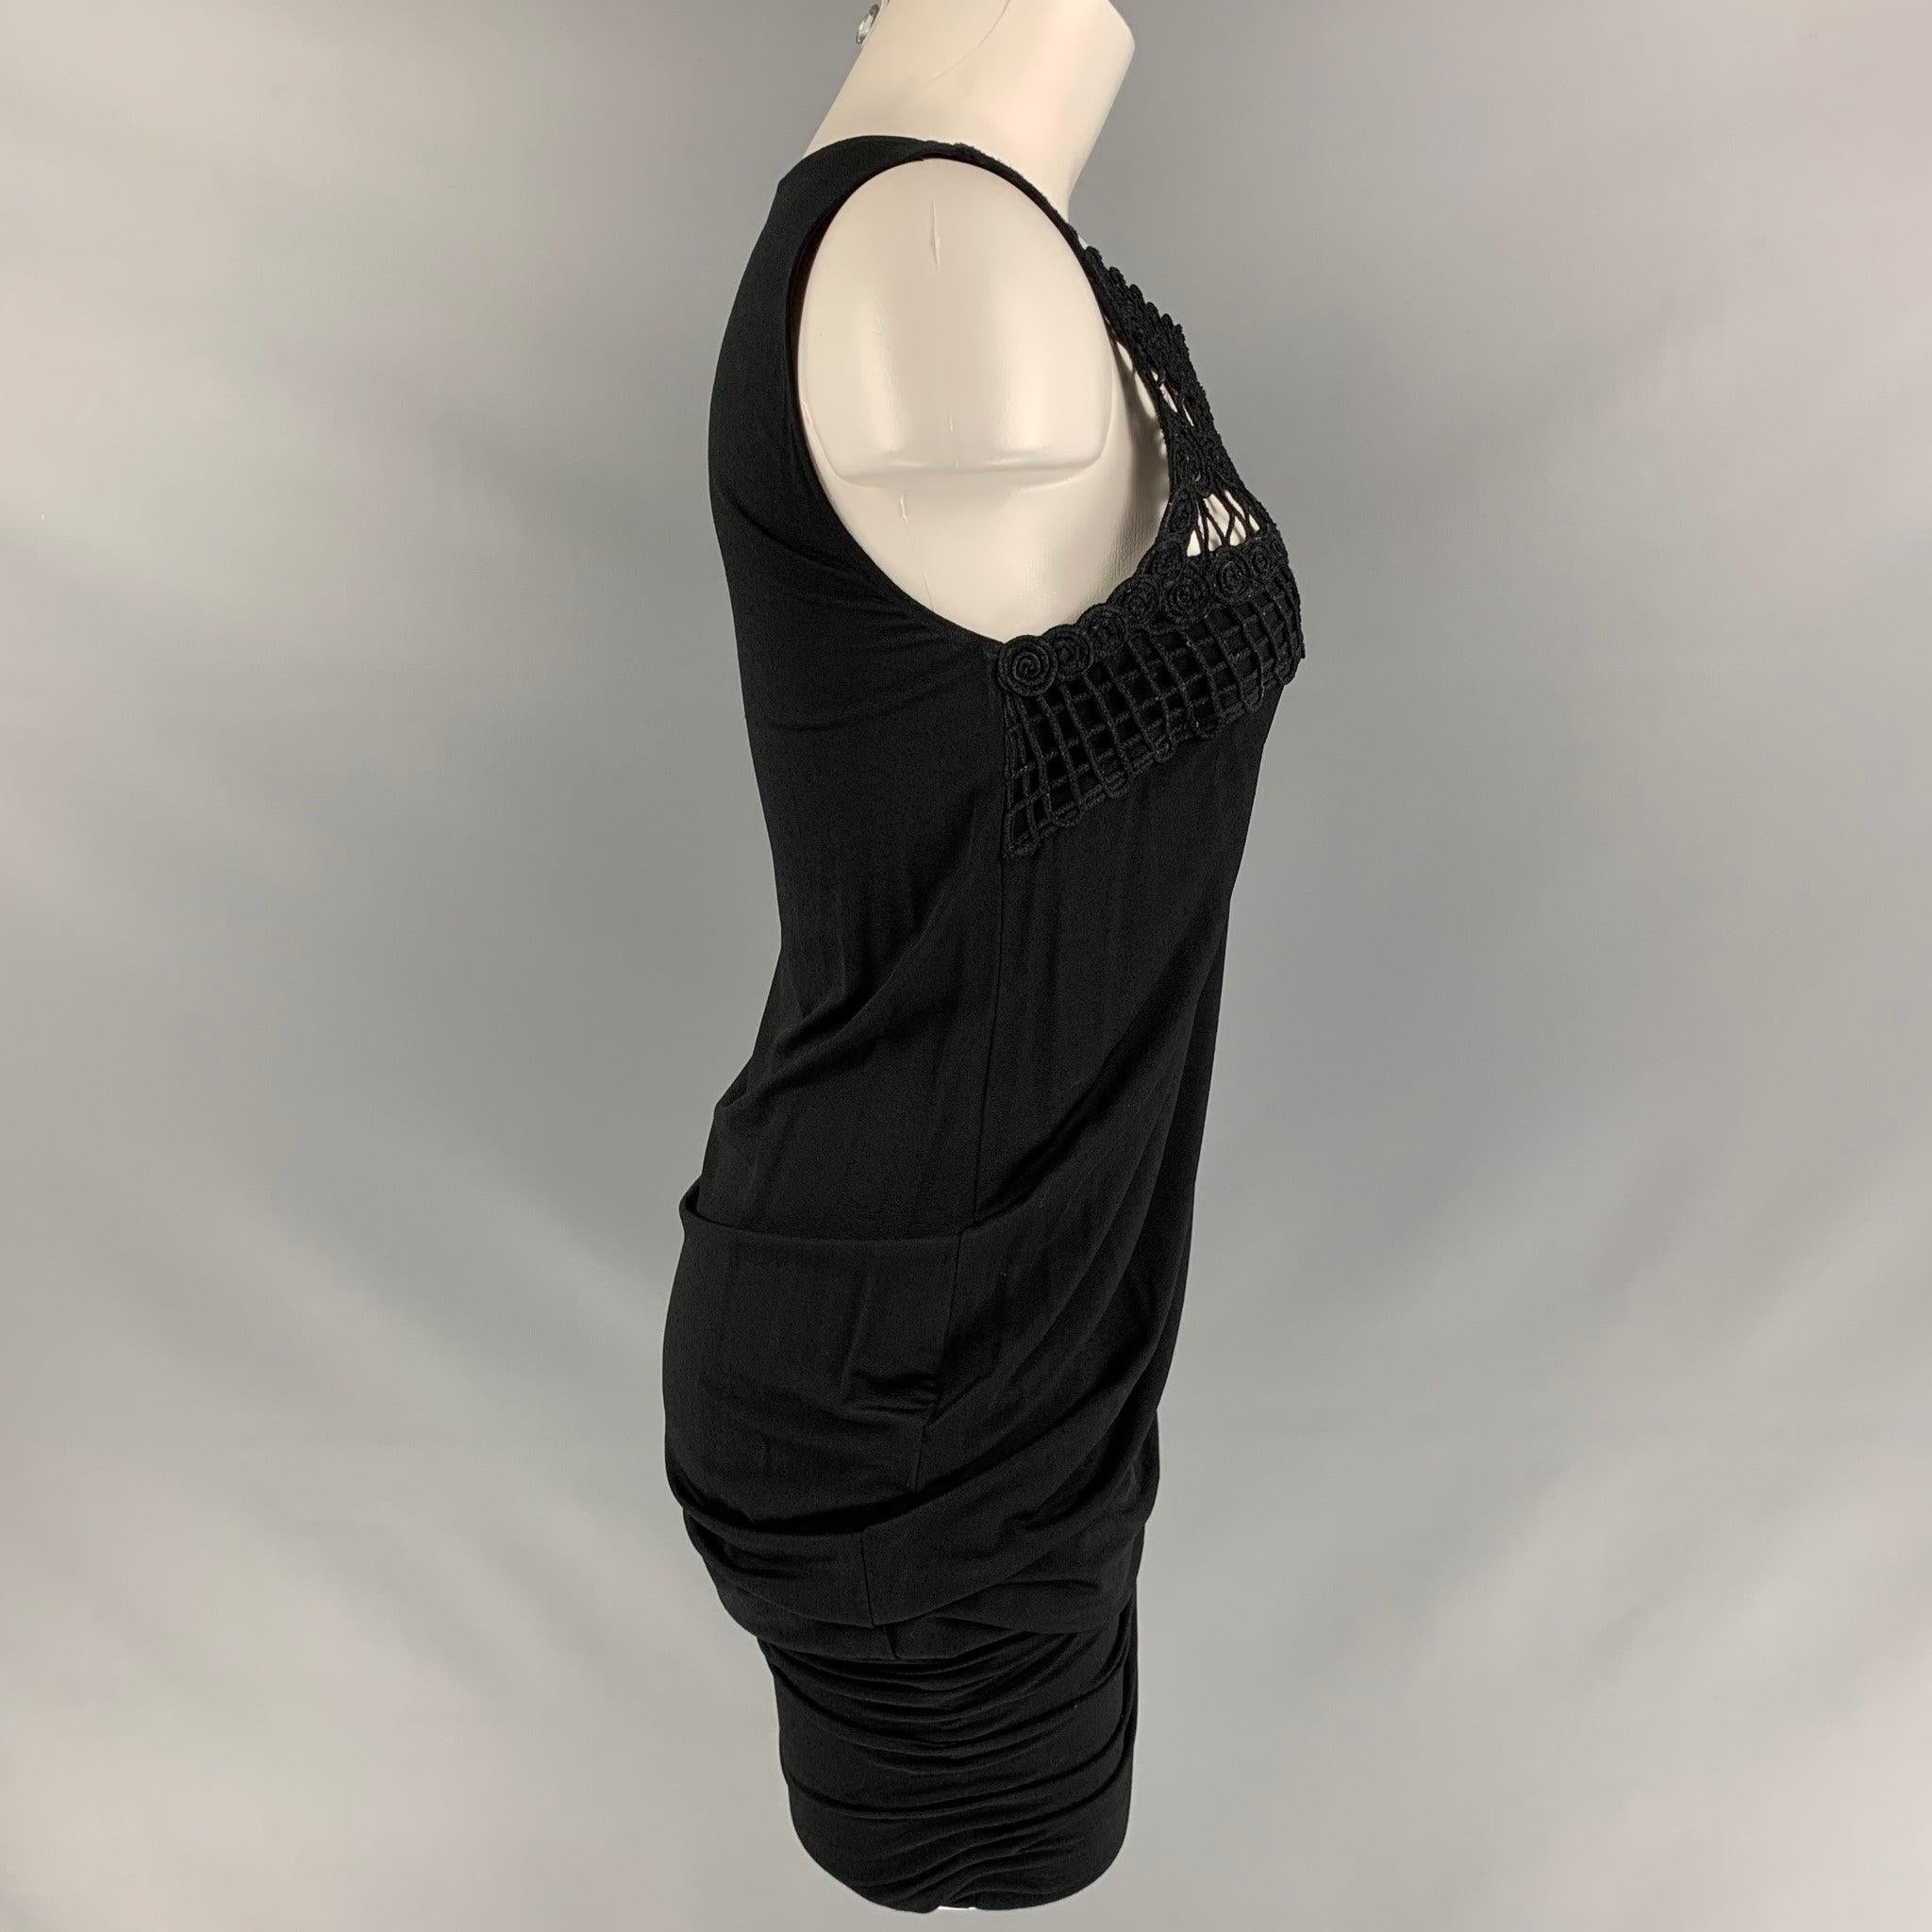 LA PERLA cocktail dress comes in a black rayon and spandex featuring a ruched bottom and crochet detail on the neckline. Made in Italy. 
Excellent Pre-Owned Condition. 

Marked:  42 

Measurements: 
 
Shoulder: 13 inBust: 33 inWaist: 36 inHip: 38